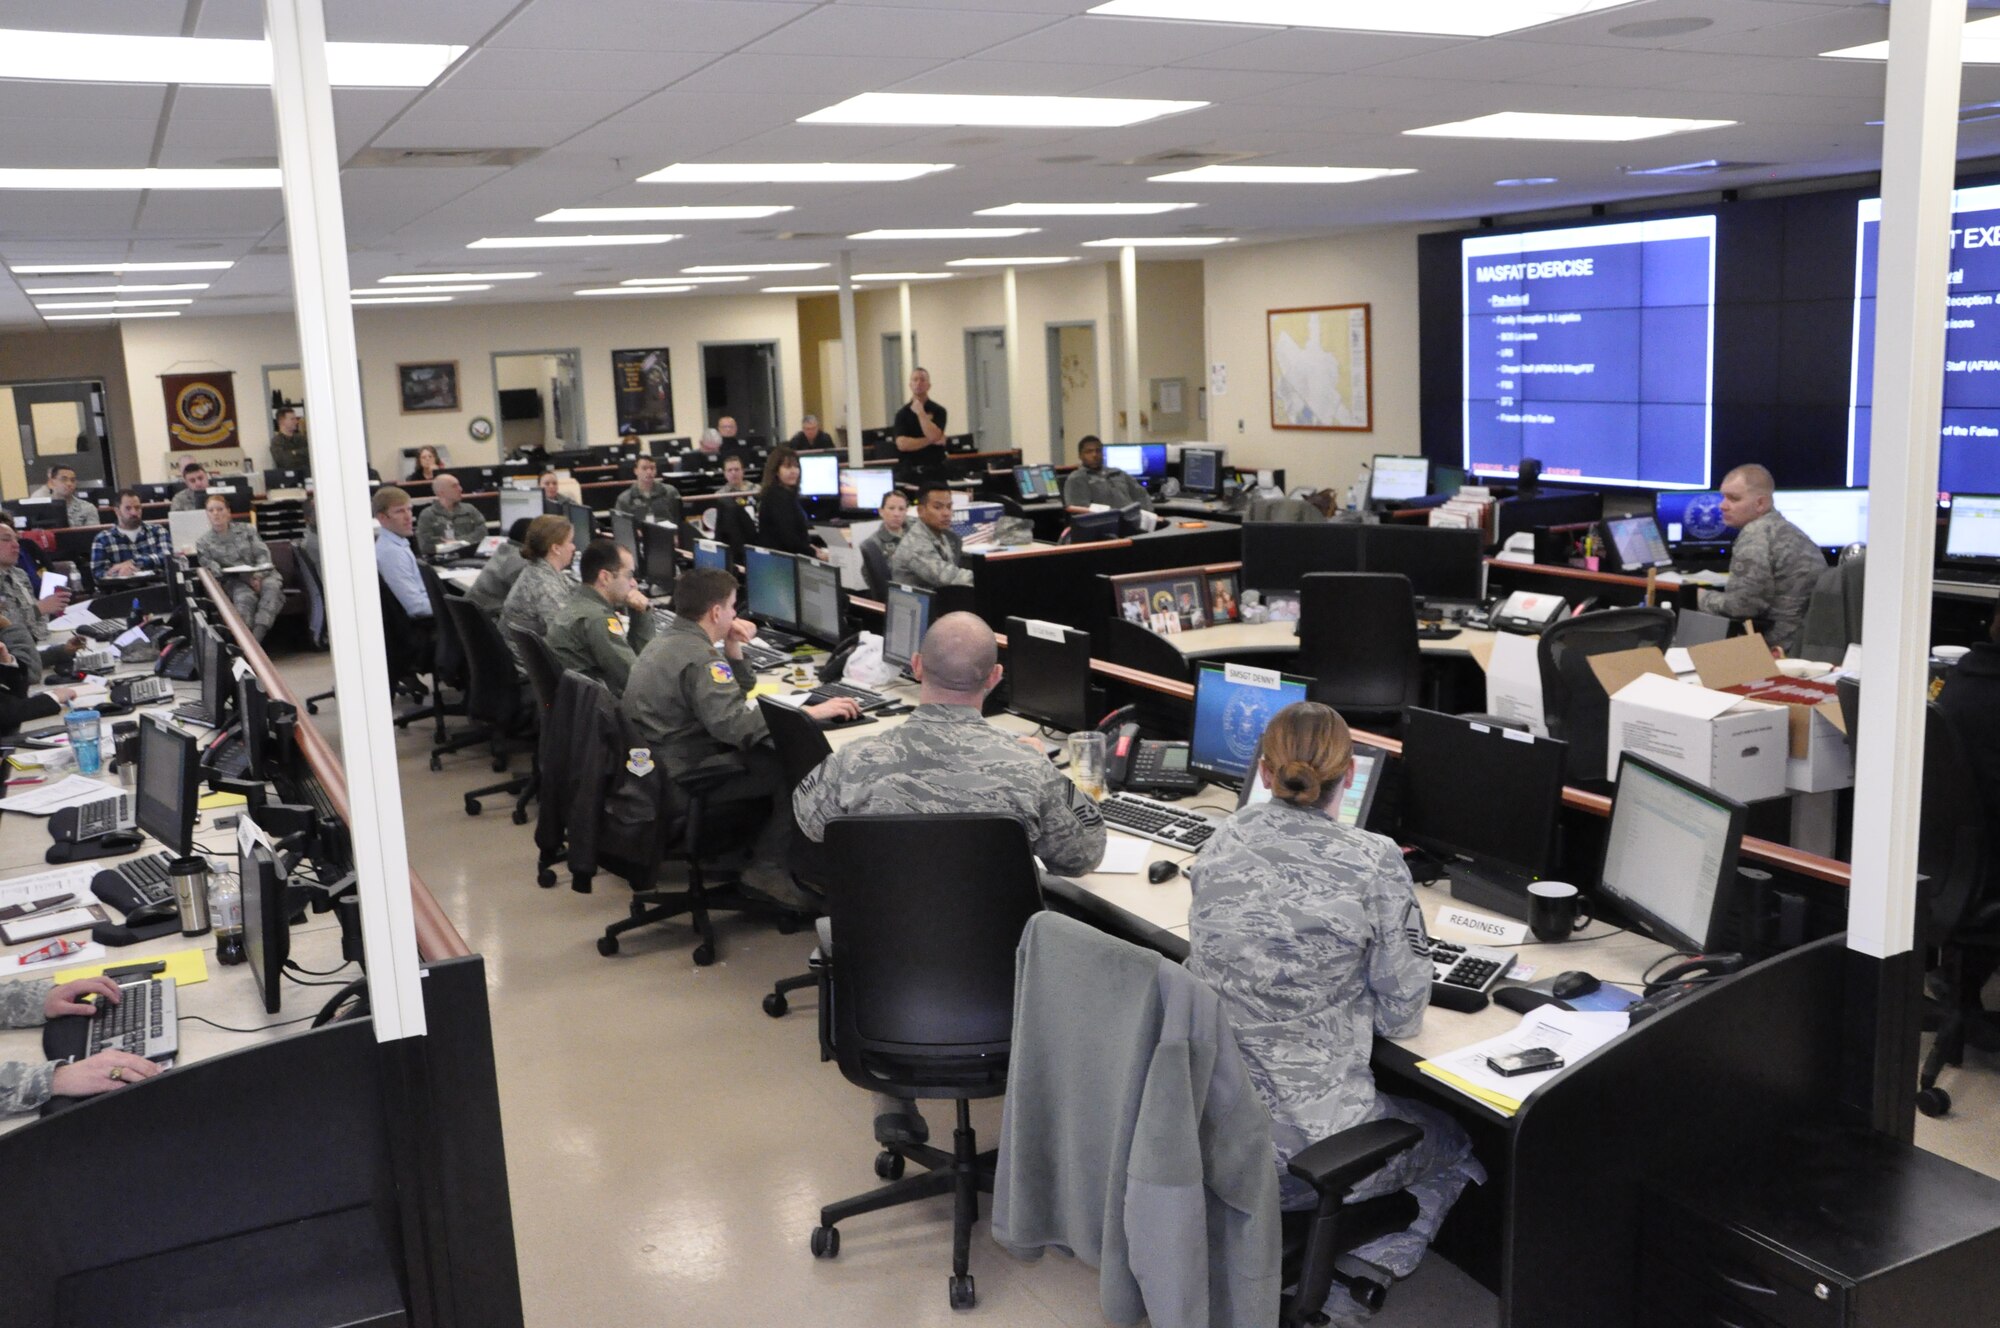 Personnel from Air Force Mortuary Affairs Operations, the 436th Airlift Wing and supporting agencies gather in the Command, Control and Communication Center at the Charles C. Carson Center for Mortuary Affairs, Dover Air Force Base, Del., for a mass fatality tabletop exercise Feb. 12, 2014. (U.S. Air Force photo/Staff Sgt. Chalanda Roberts) 